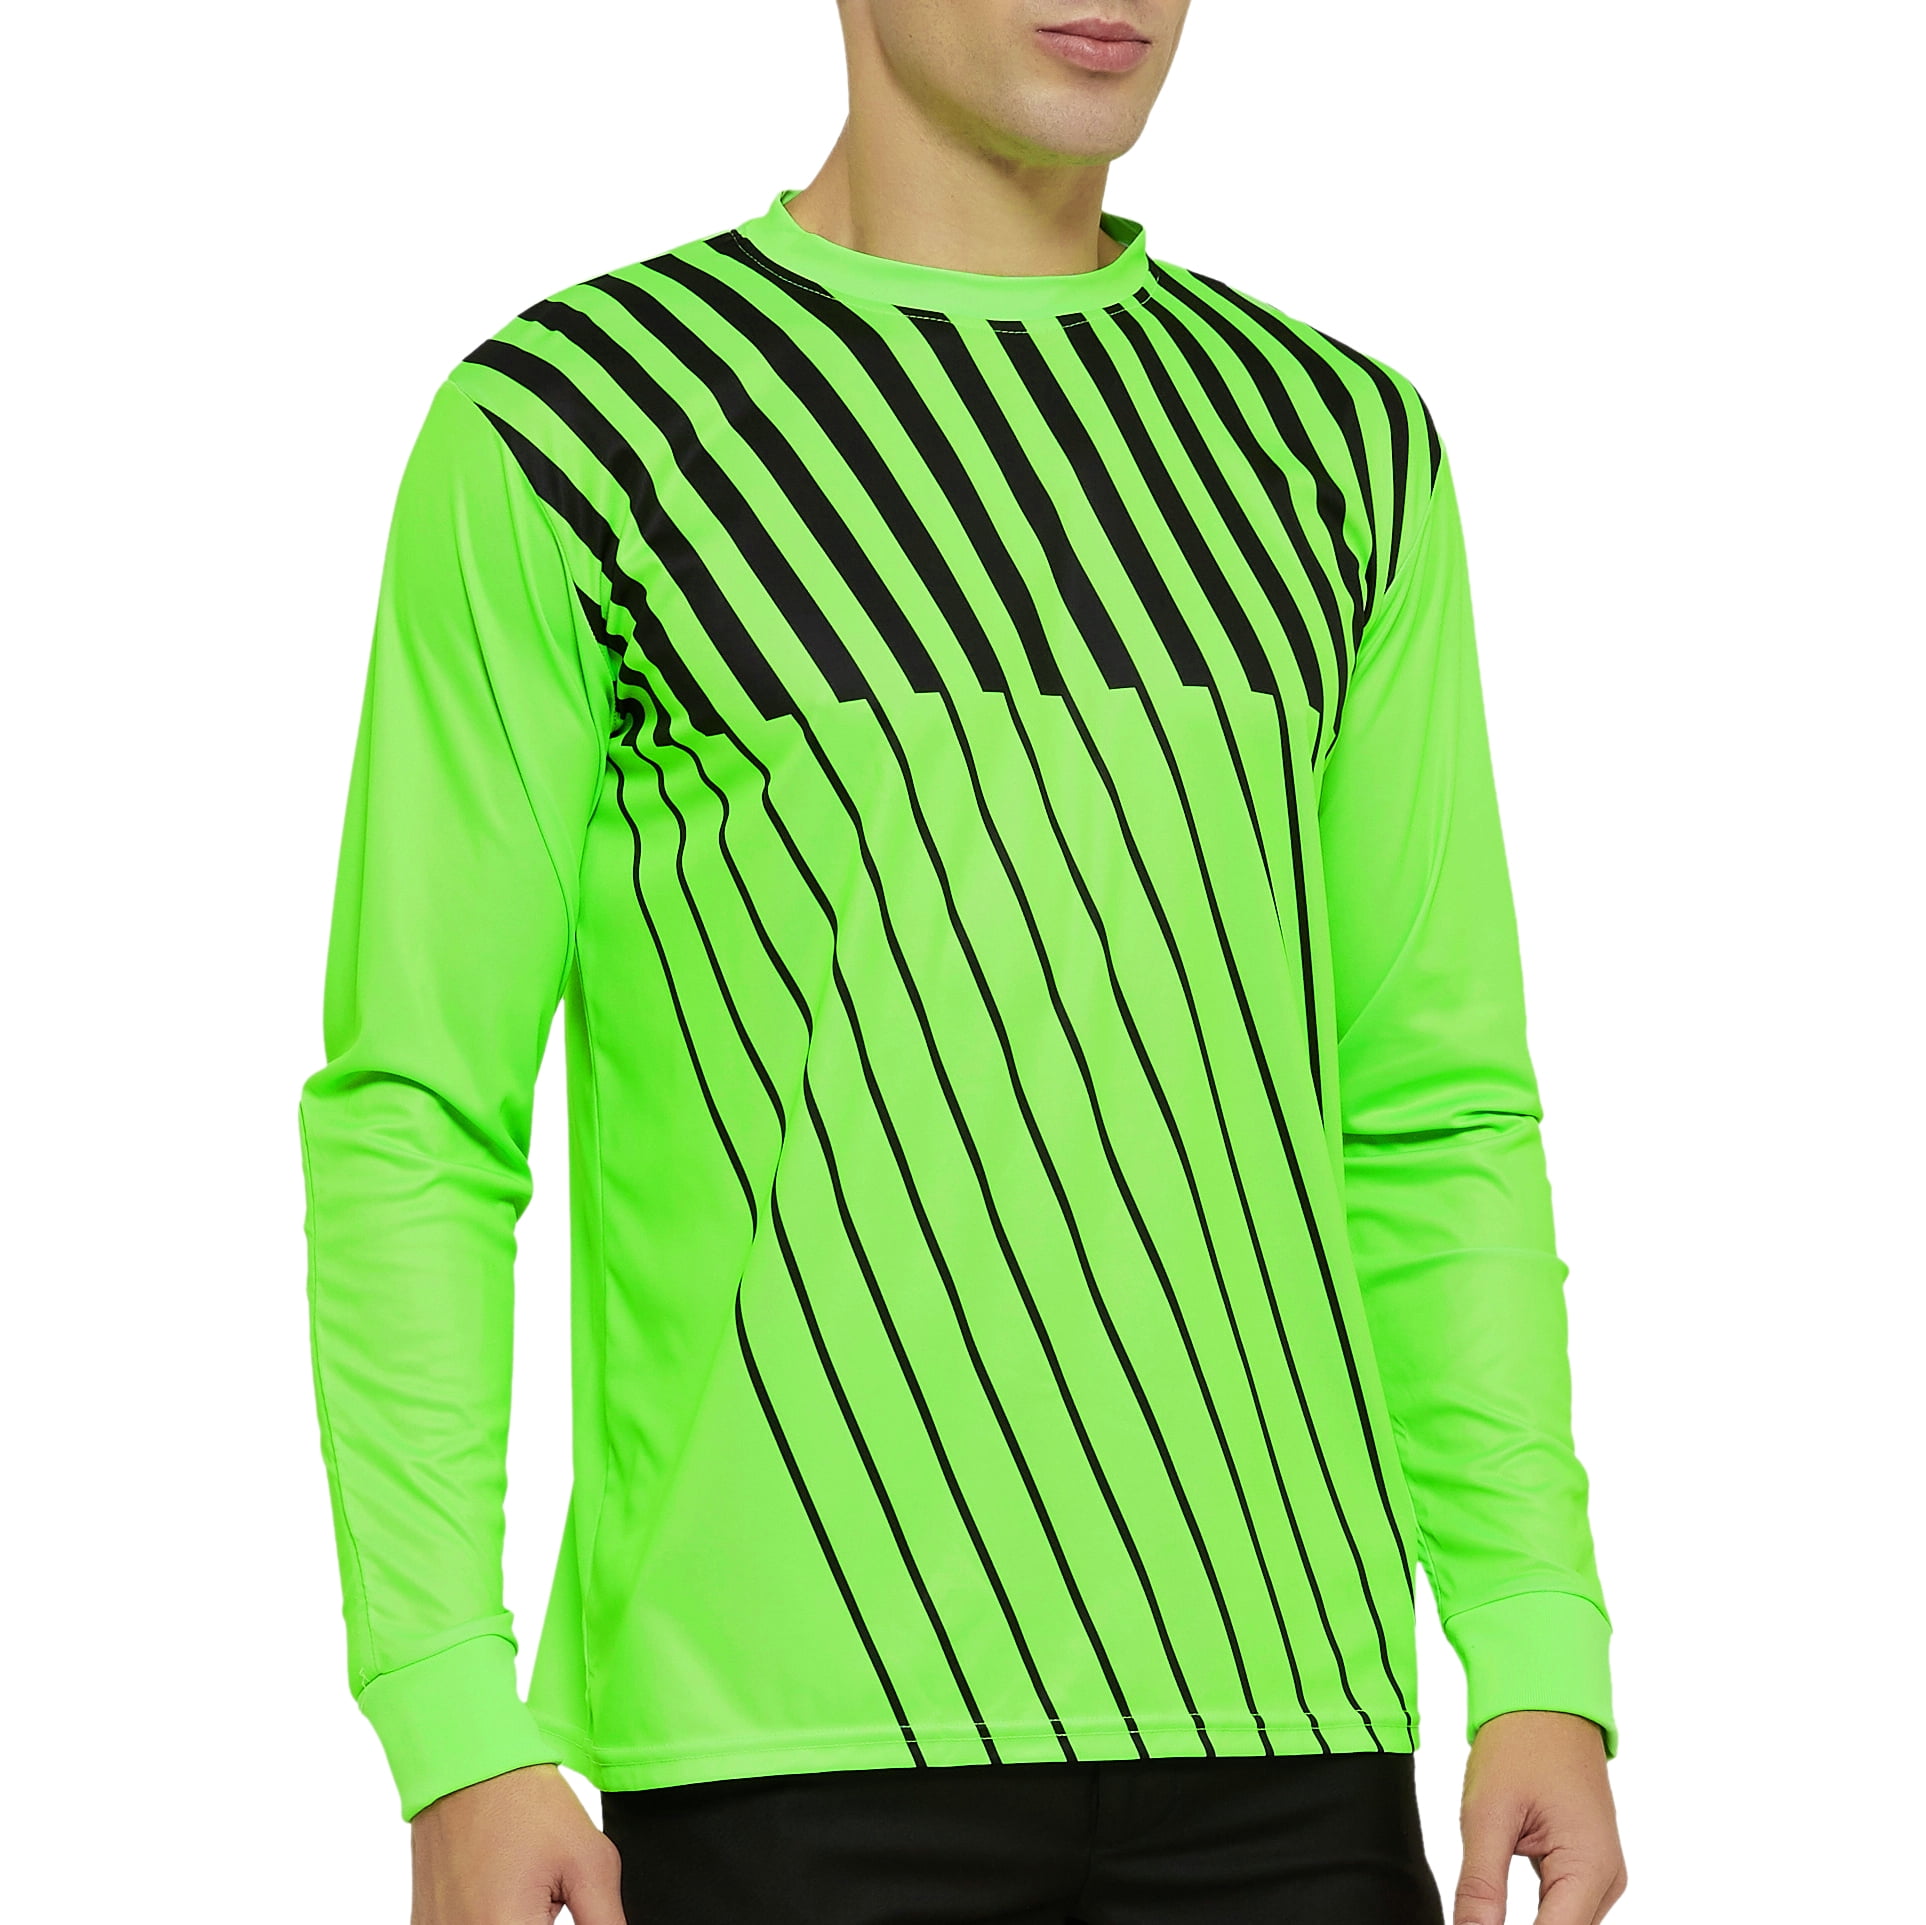 Pair of BRAND NEW PEPSI Soccer Goalie Jersey Your Choice M or XL 